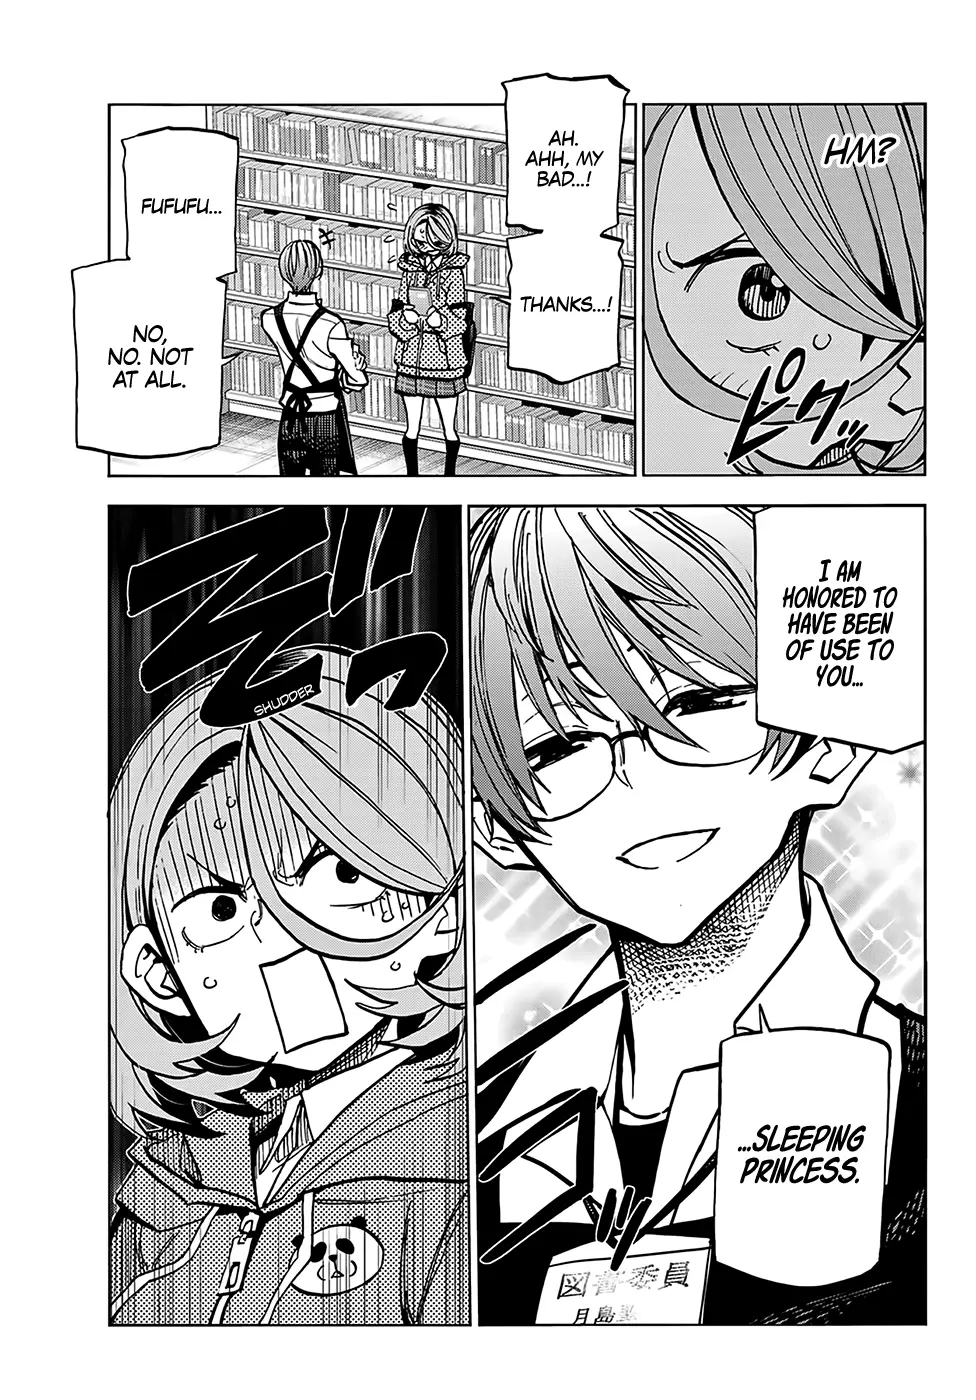 The Story Between A Dumb Prefect And A High School Girl With An Inappropriate Skirt Length - 5 page 6